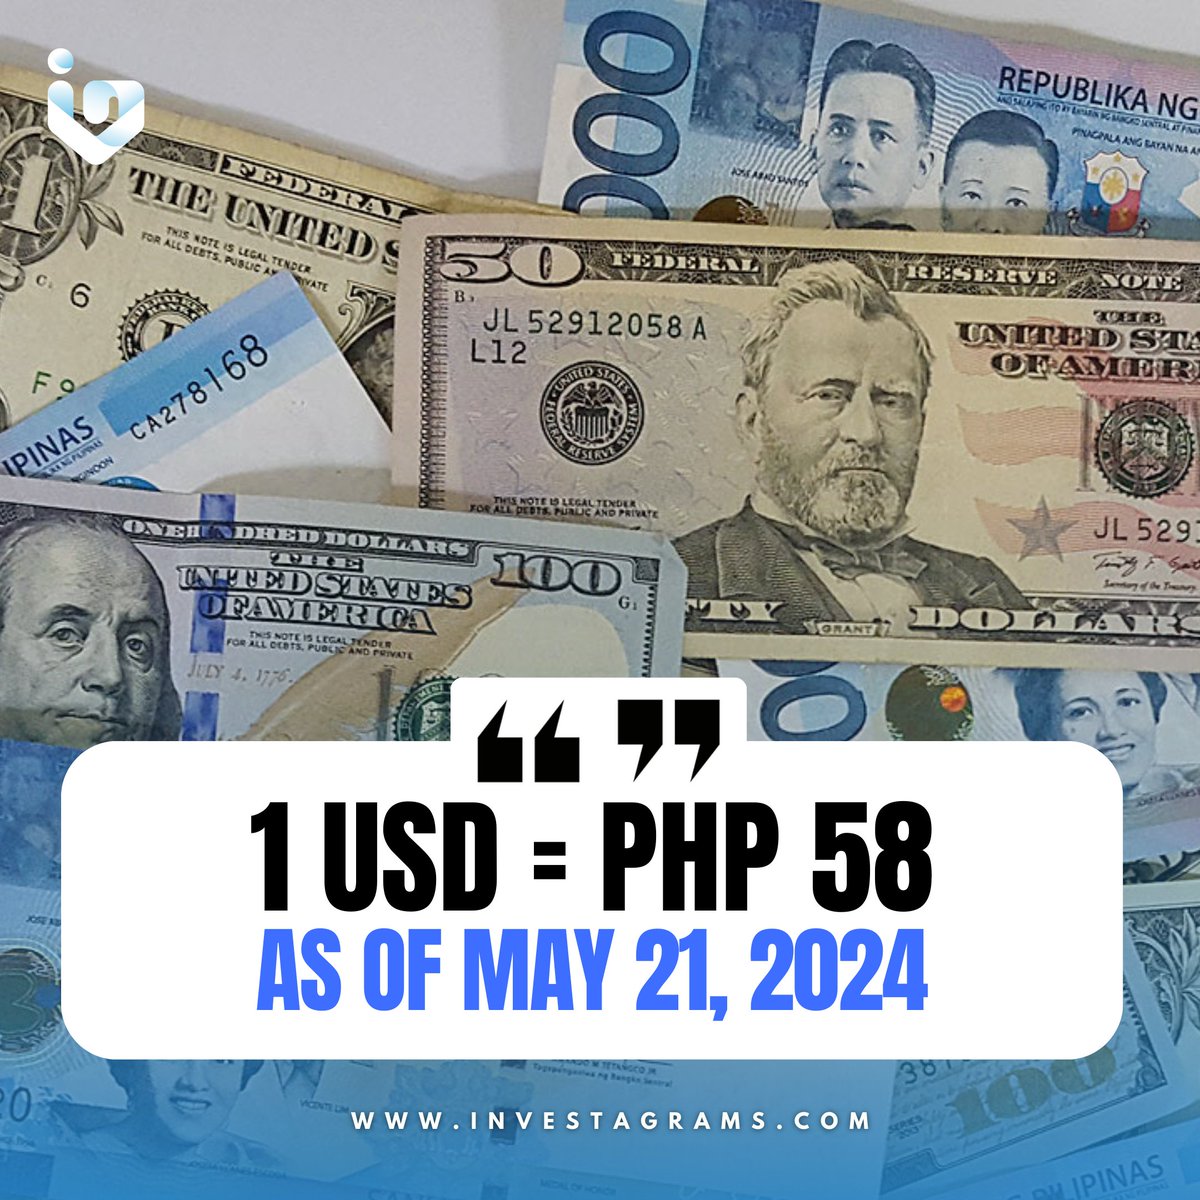 THE USDPHP EXCHANGE RATE IS NOW AT 58

The exchange rate has risen by 0.71% to start the week. Today, it reached its 52-week high of 58.189.

Check out the price chart here: investagrams.com/Chart/USDPHP

Source: bap.org.ph